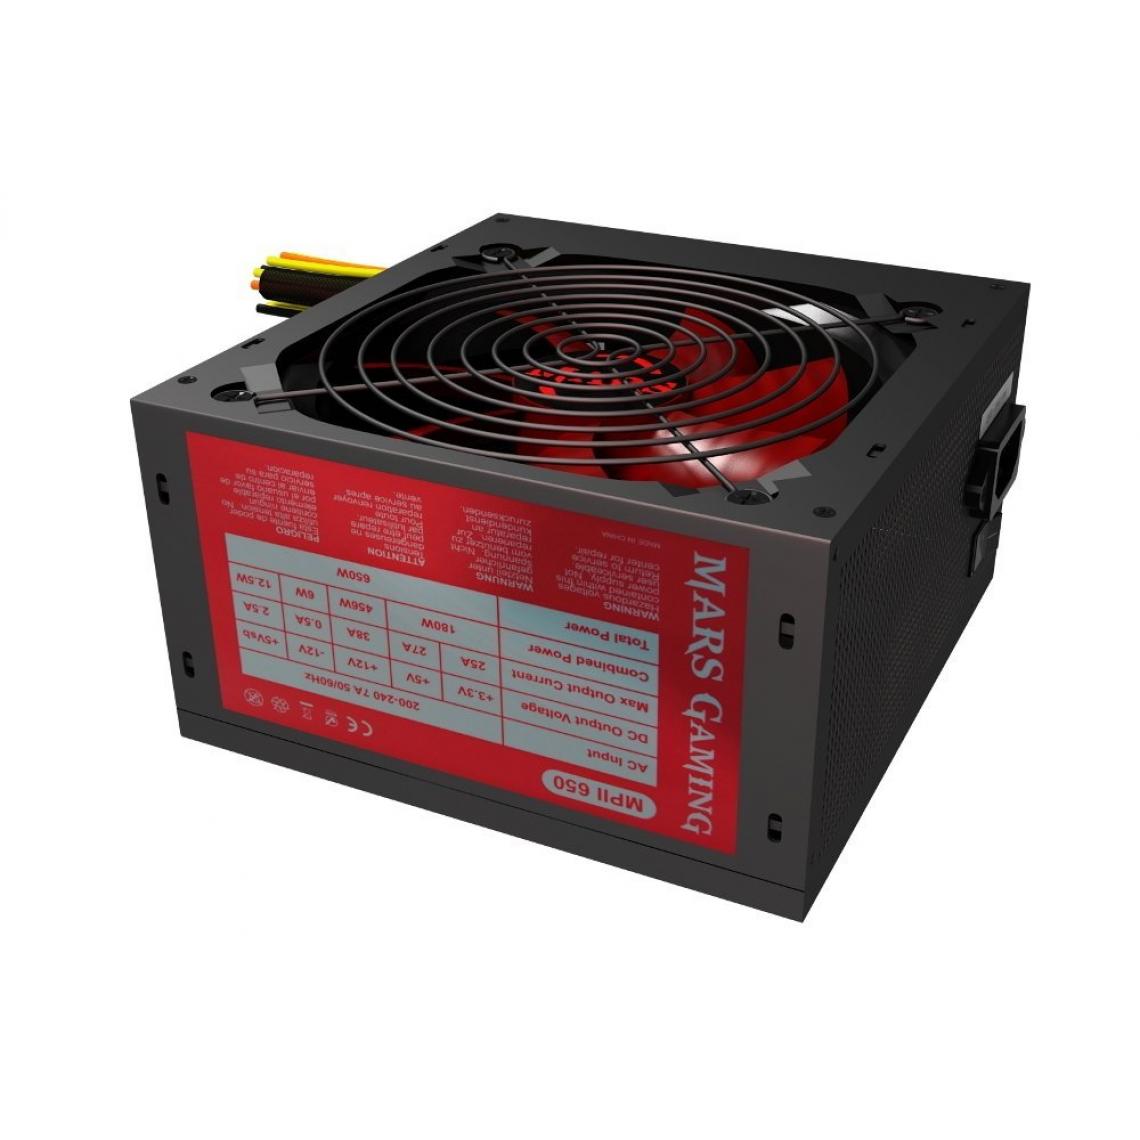 Mars Gaming - Alimentation ATX MPII 650W (Noir/Rouge) - Alimentation modulaire